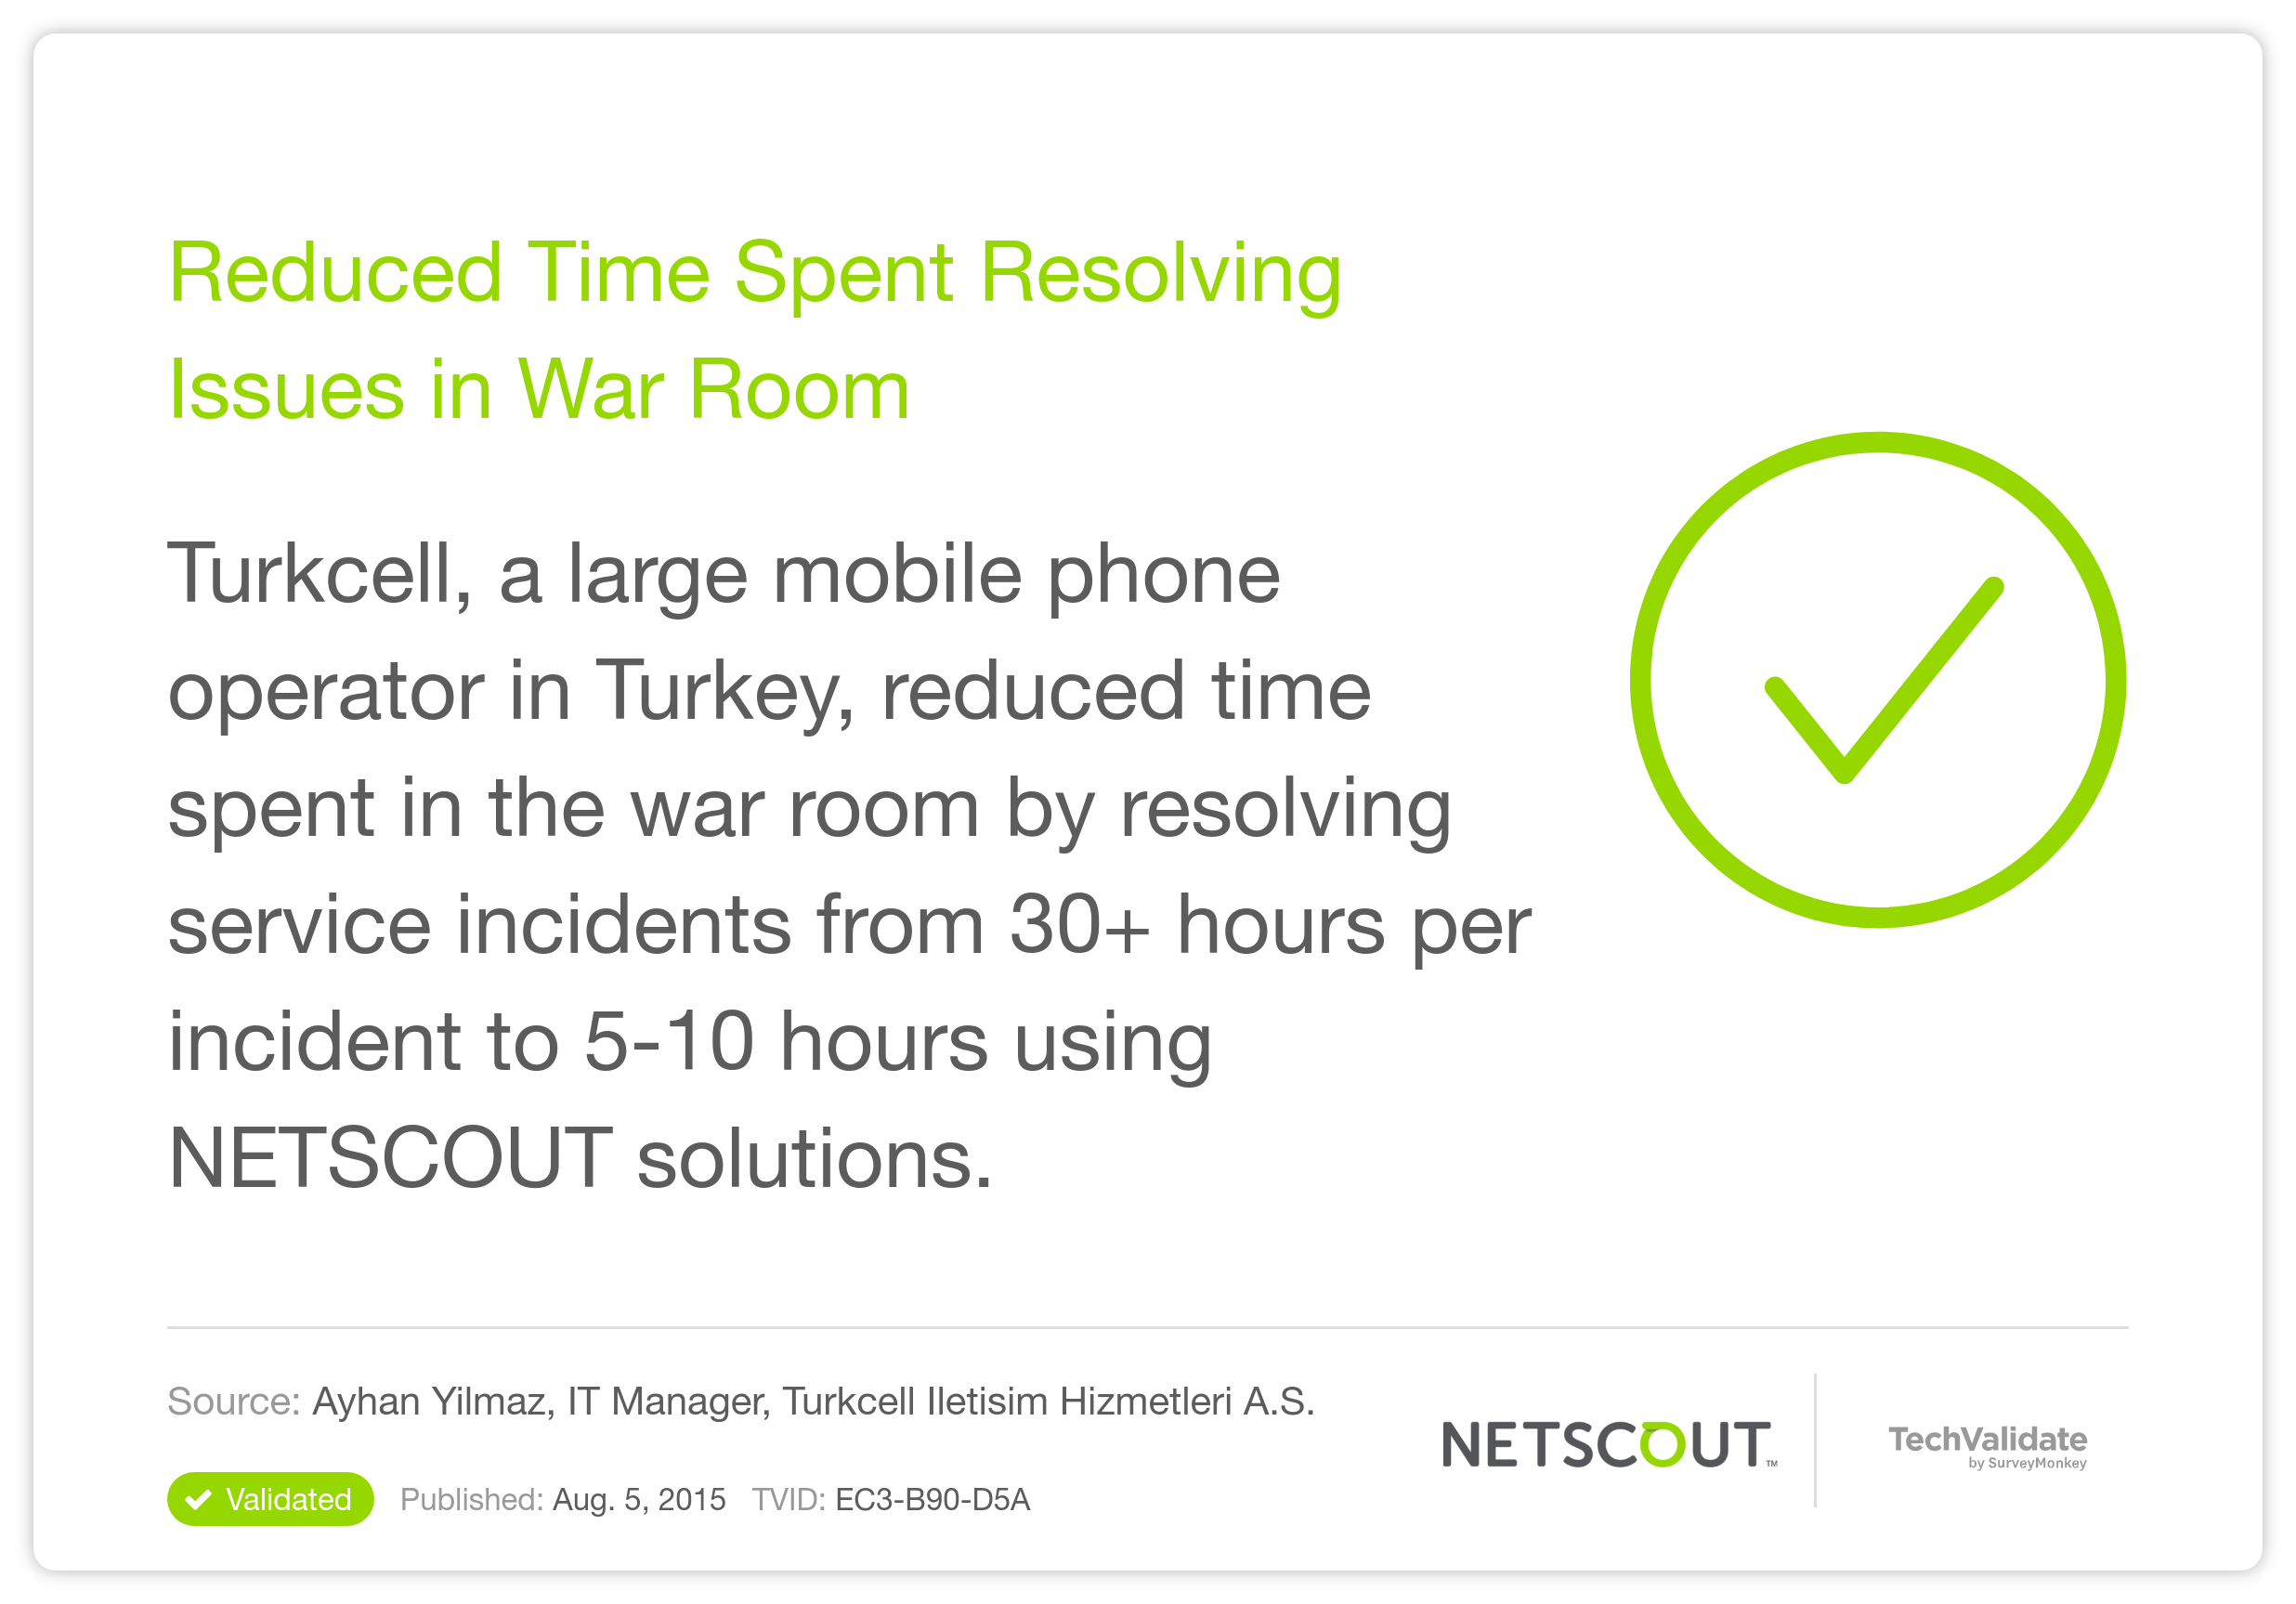 Reduced Time Spent Resolving Issues in War Room